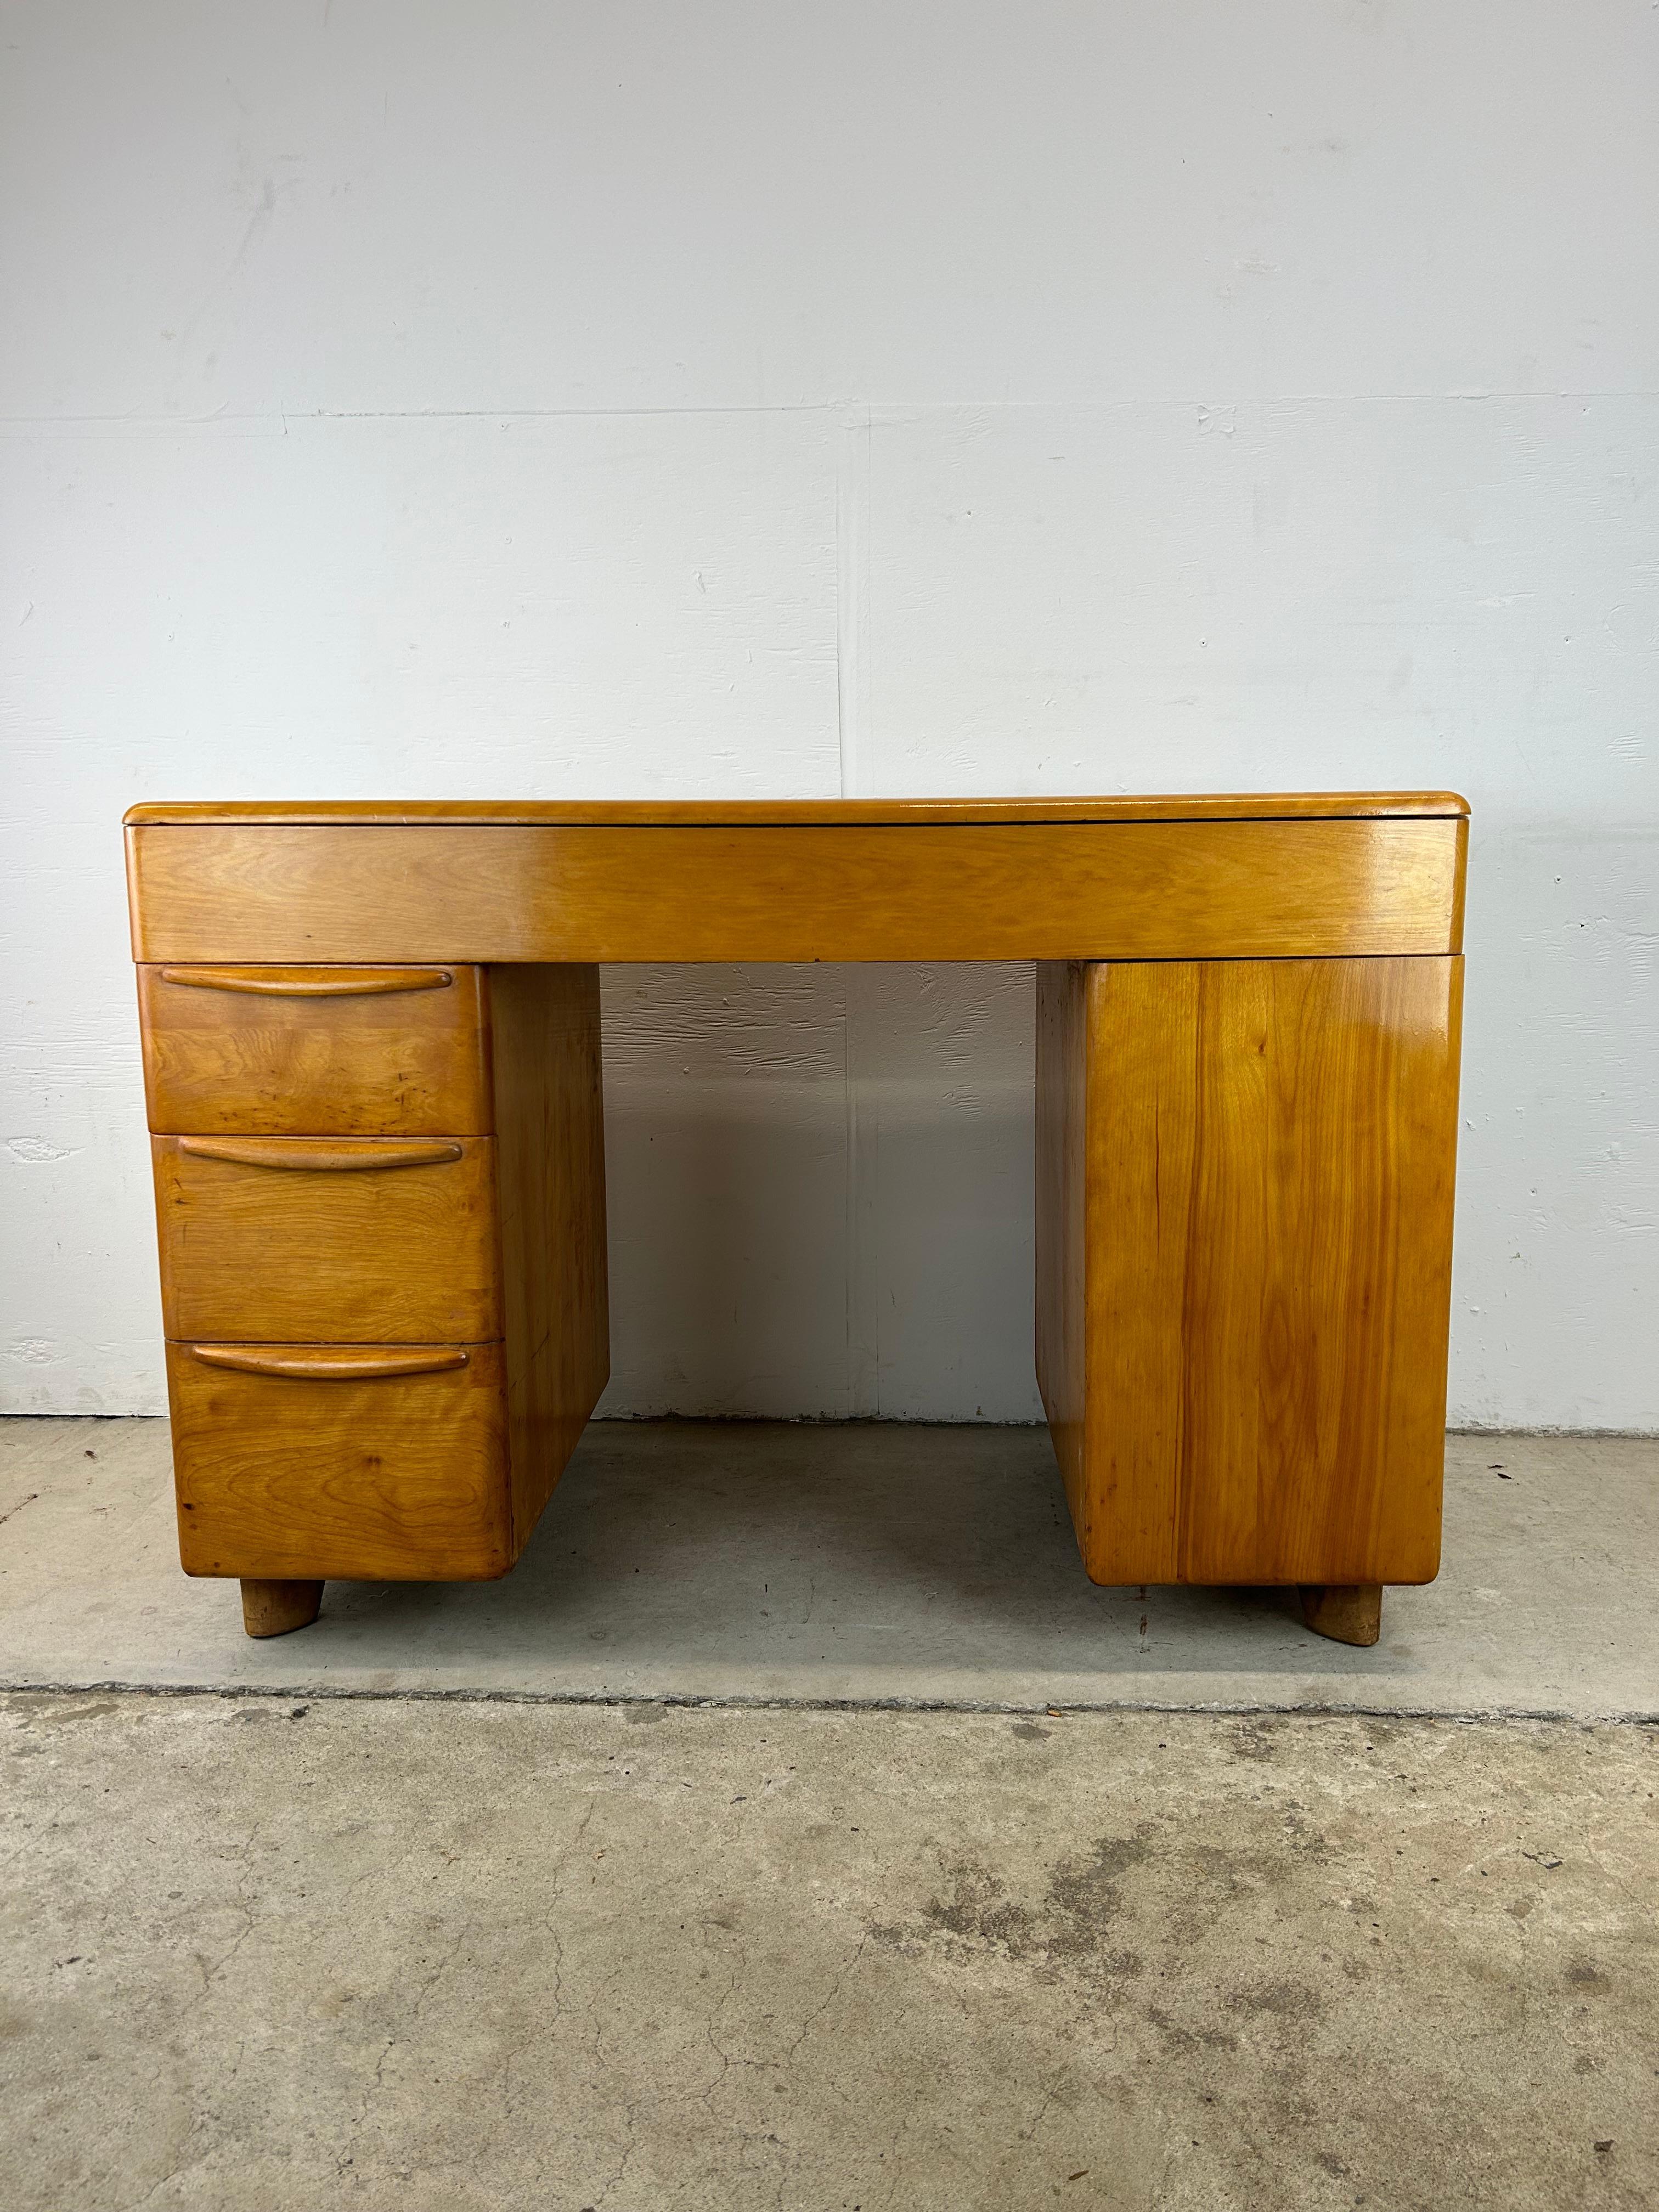 This mid century modern writing desk by Heywood Wakefield features hardwood construction, original champagne finish with newly applied clear coat, three dovetailed drawers with sculpted wood pulls, opened storage on the right hand side, and finished